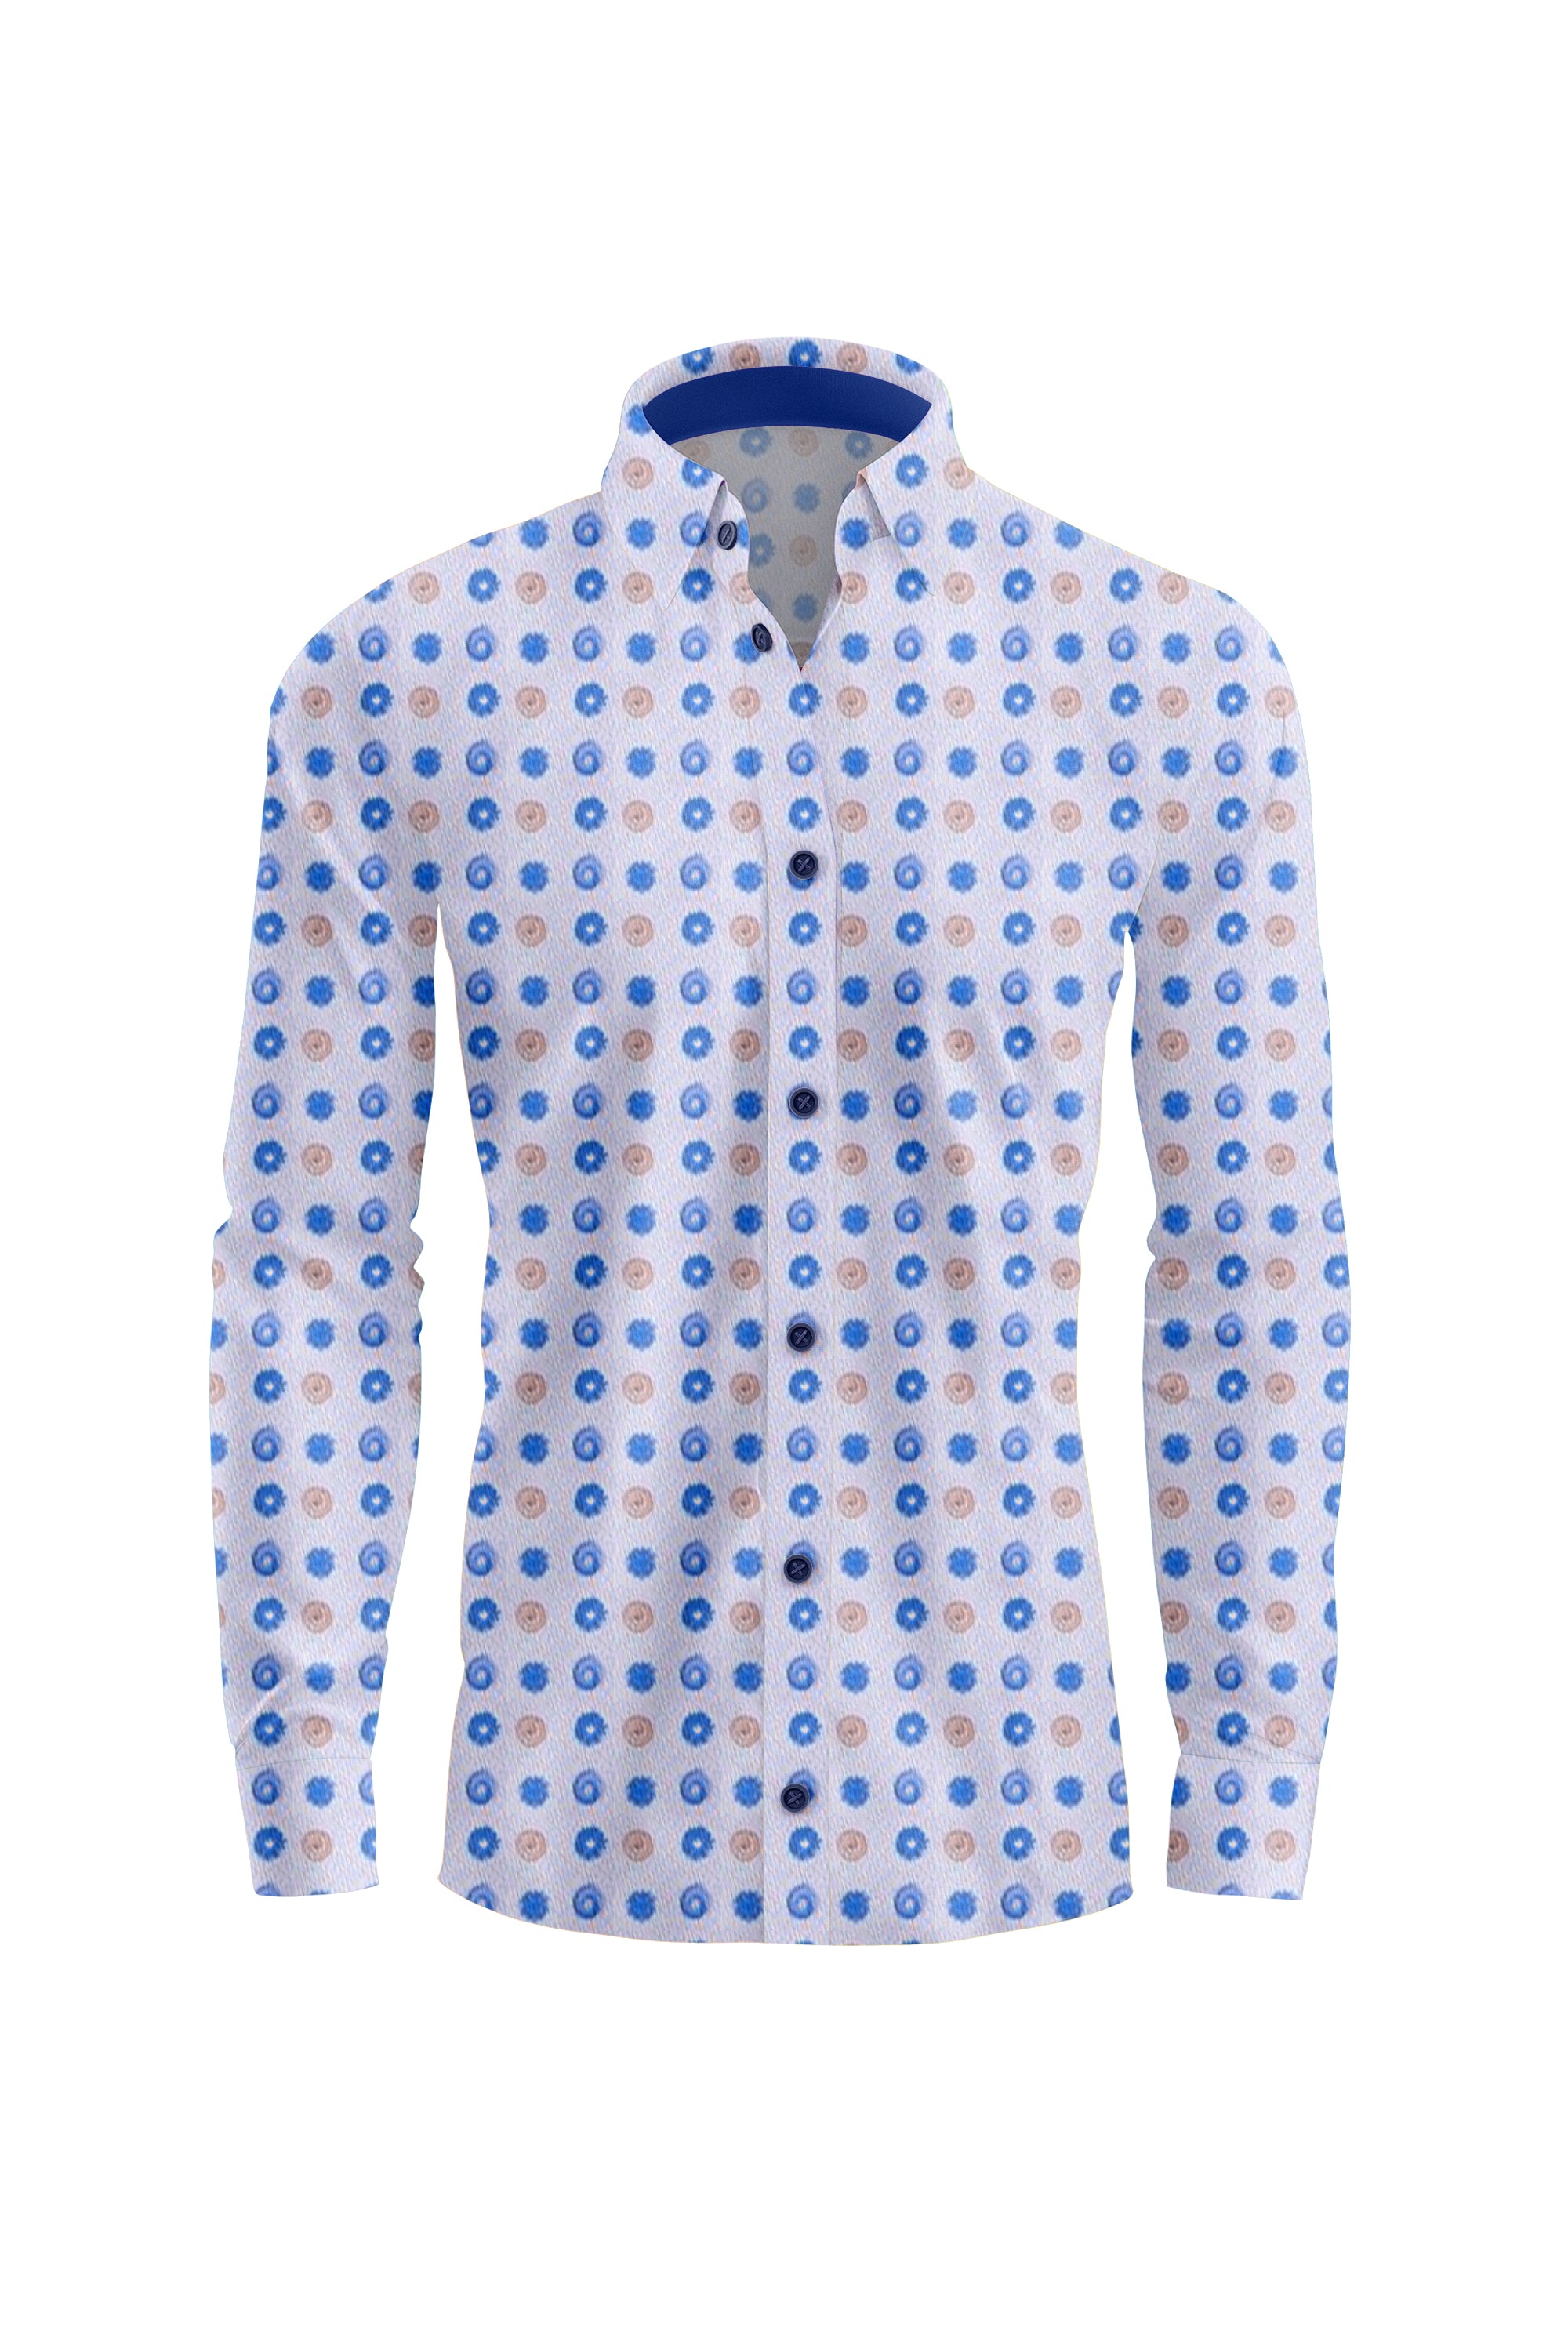 White Shirt With Blue And Brown Circles CASUAL SHIRT On Sale 30% Off Vercini